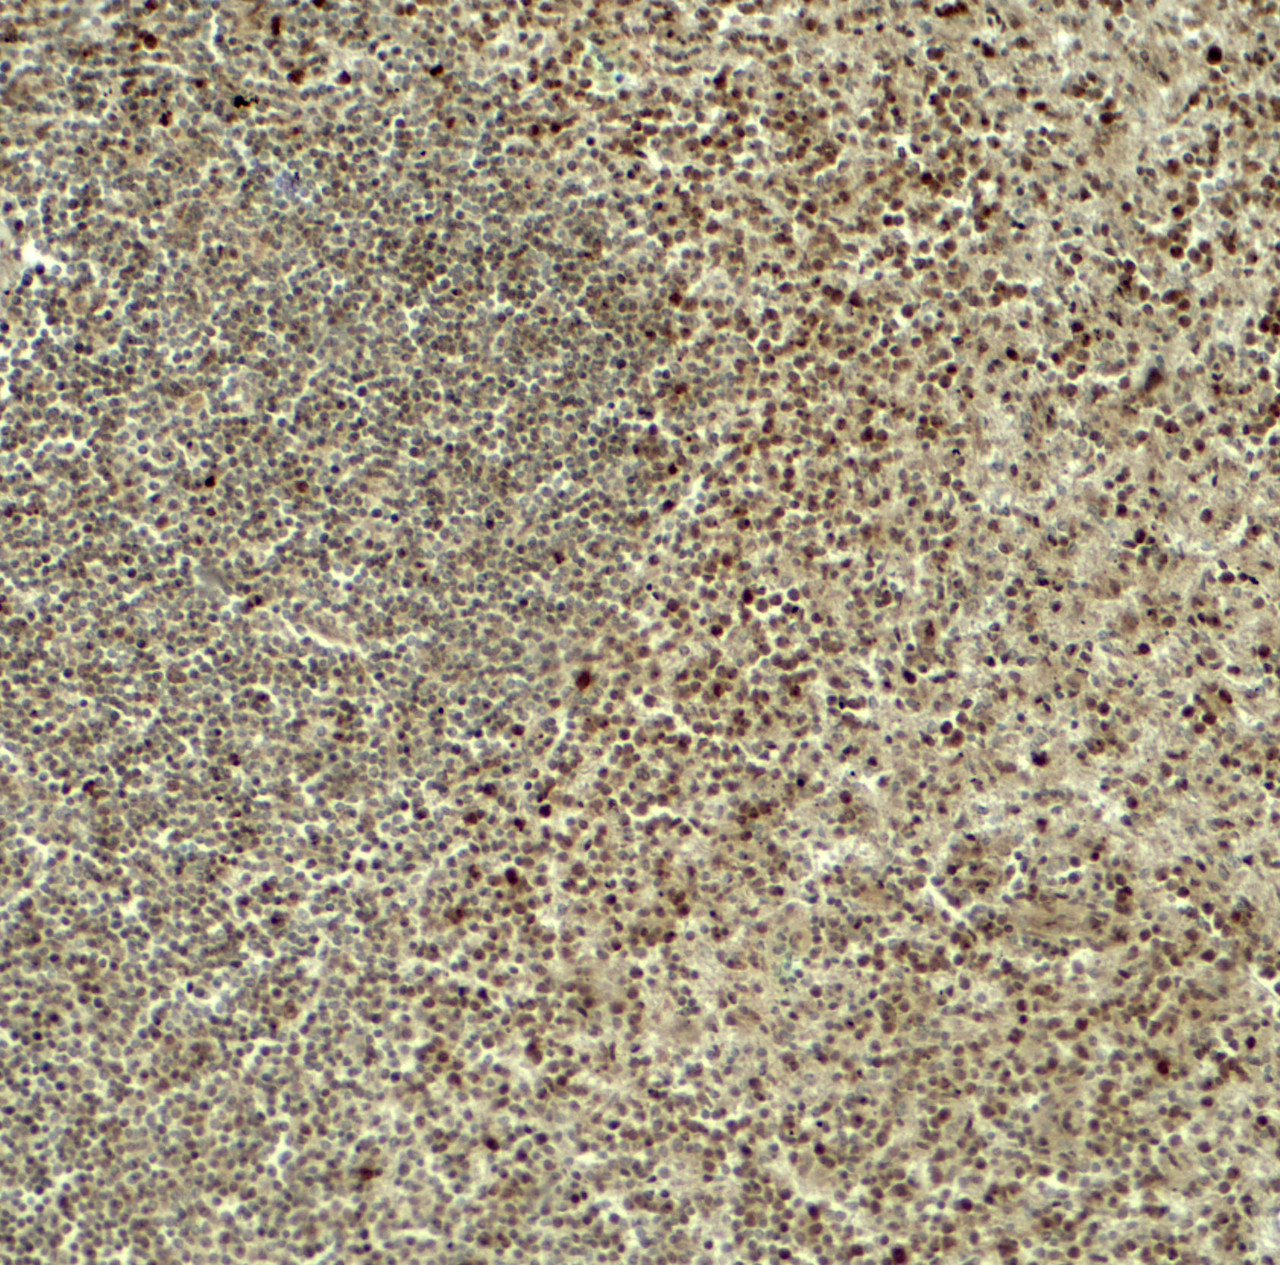 Immunohistochemistry of HES5 in human spleen tissue with HES5 antibody at 5 ug/ml.